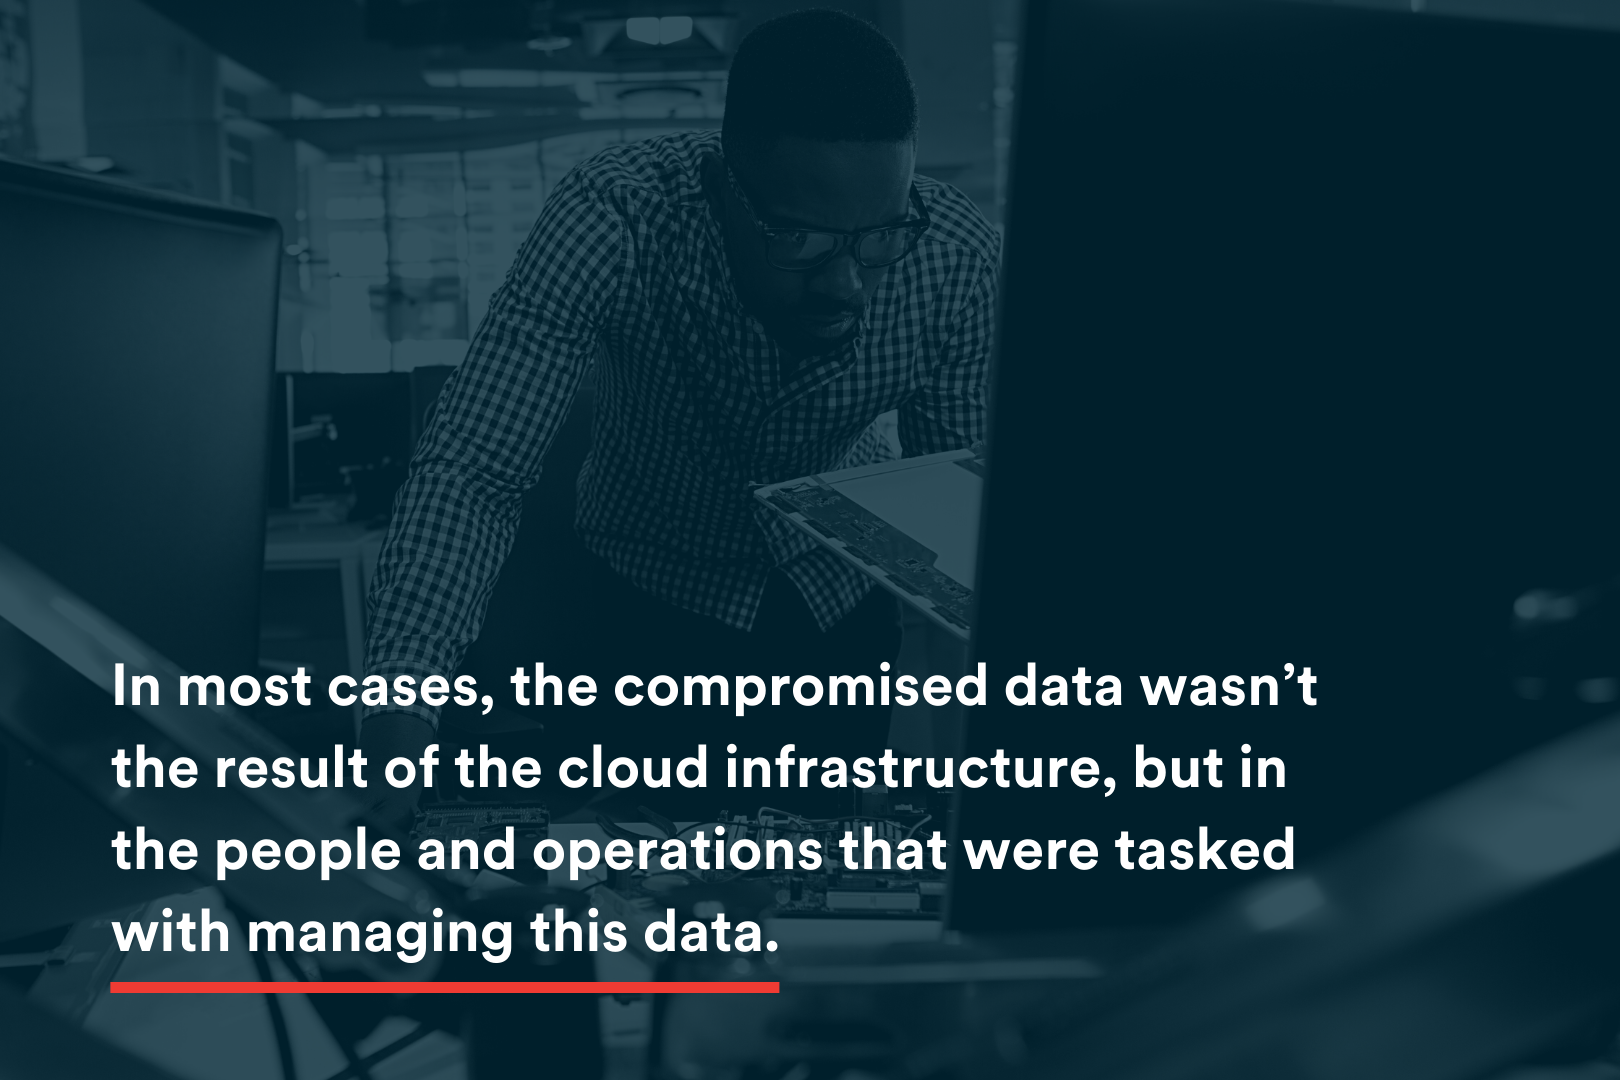 In Blog Image - In most cases, the compromised data wasn’t the result of the cloud infrastructure, but in the people and operations that were tasked with managing this data.